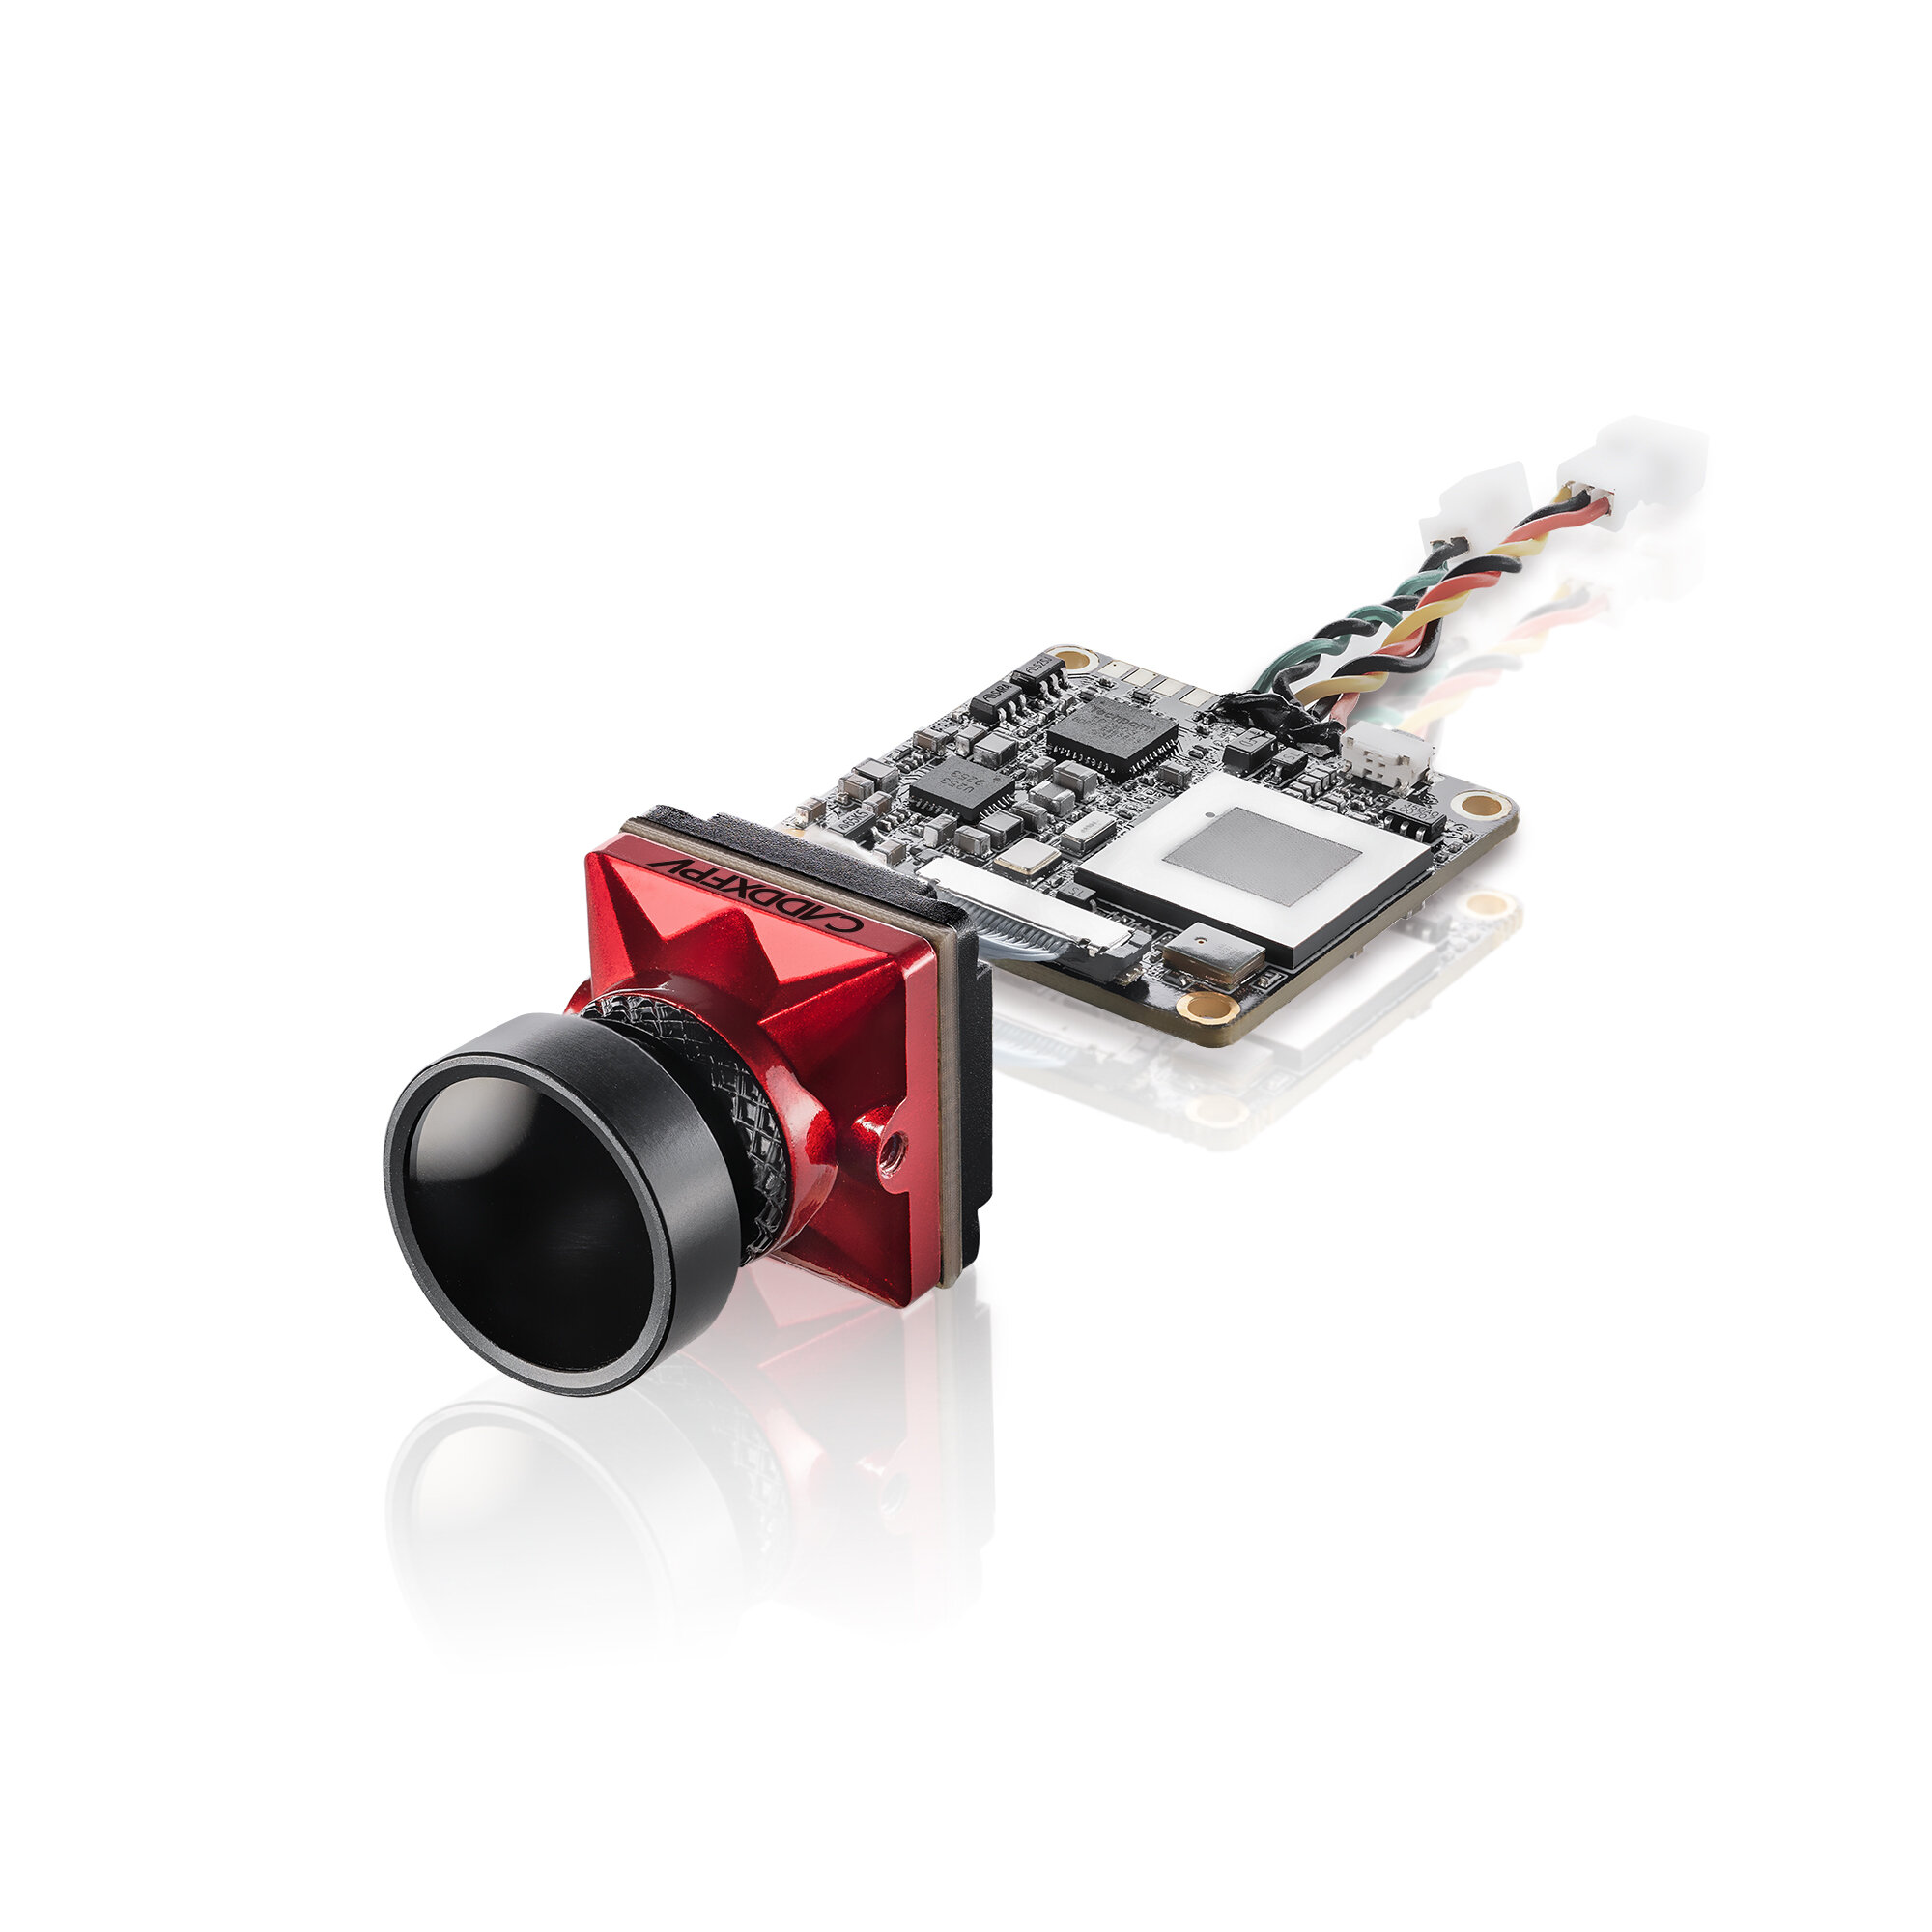 Caddx Loris Micro 2.1mm 800TVL 4K／60fps HD 160°FOV FPV Camera 16g Micro Size with ND Filter for FPV Racing RC Drone